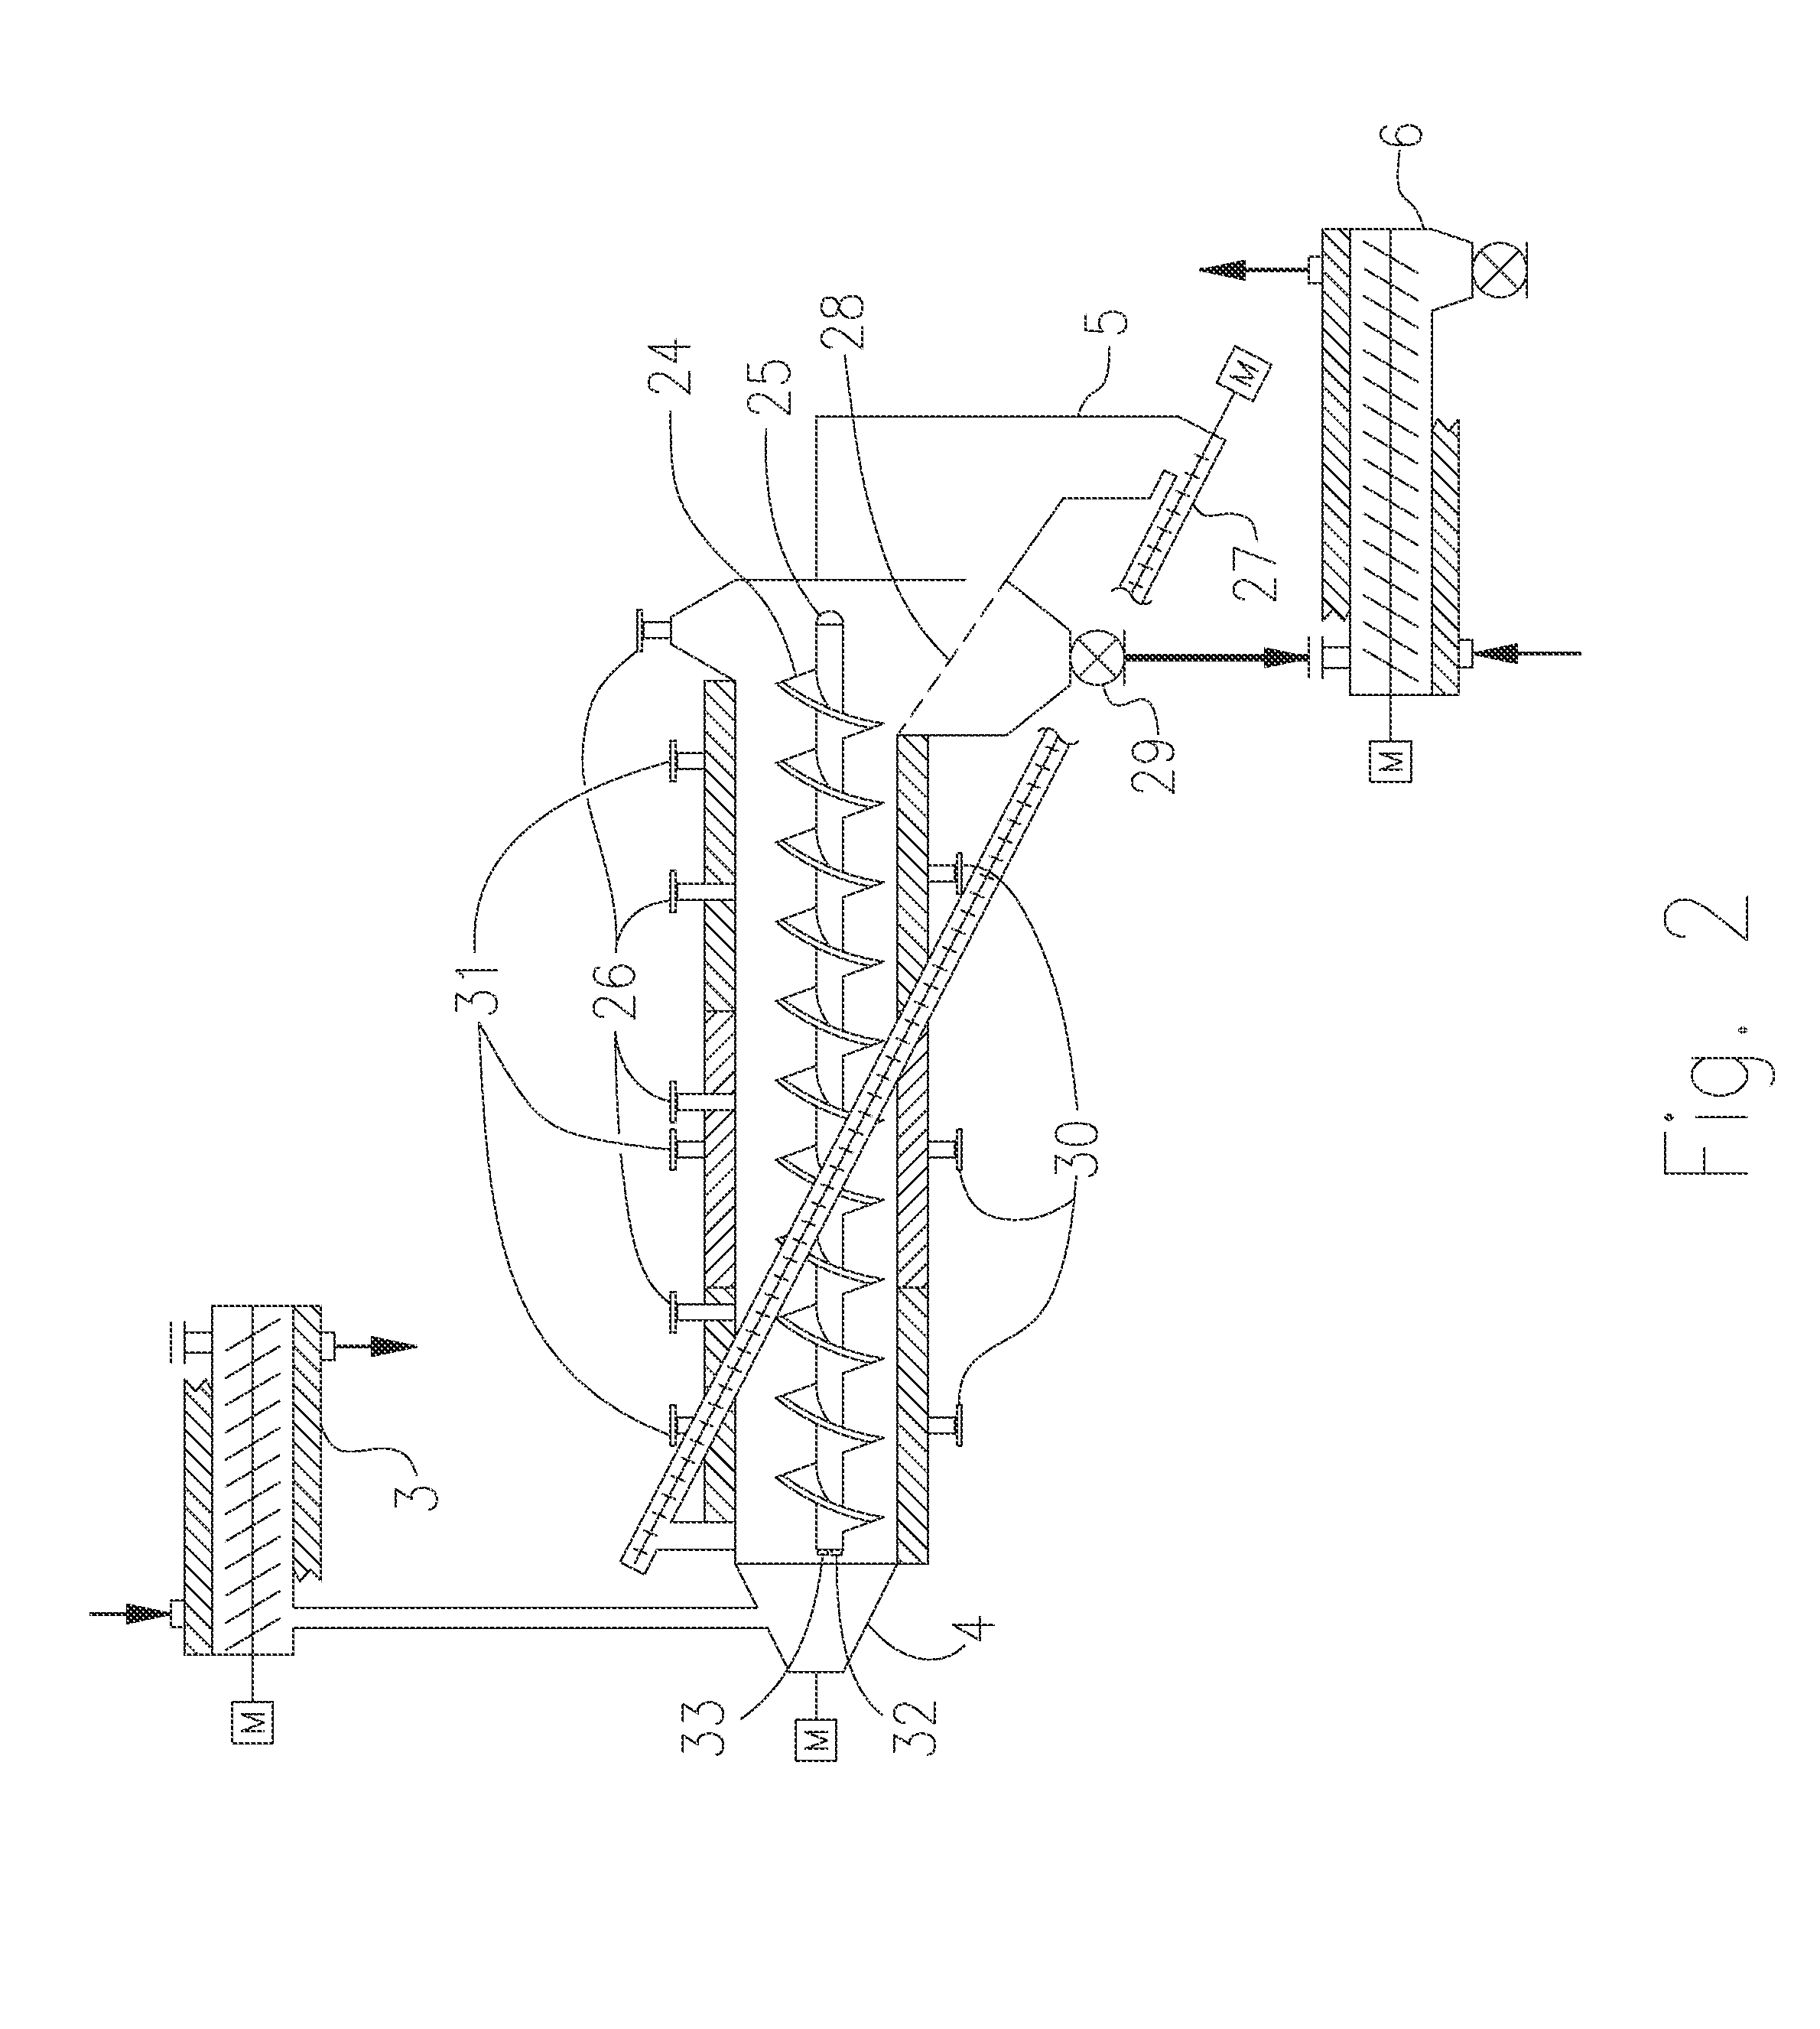 Process and Apparatus for producing Hydrocarbon Fuel from Waste Plastic